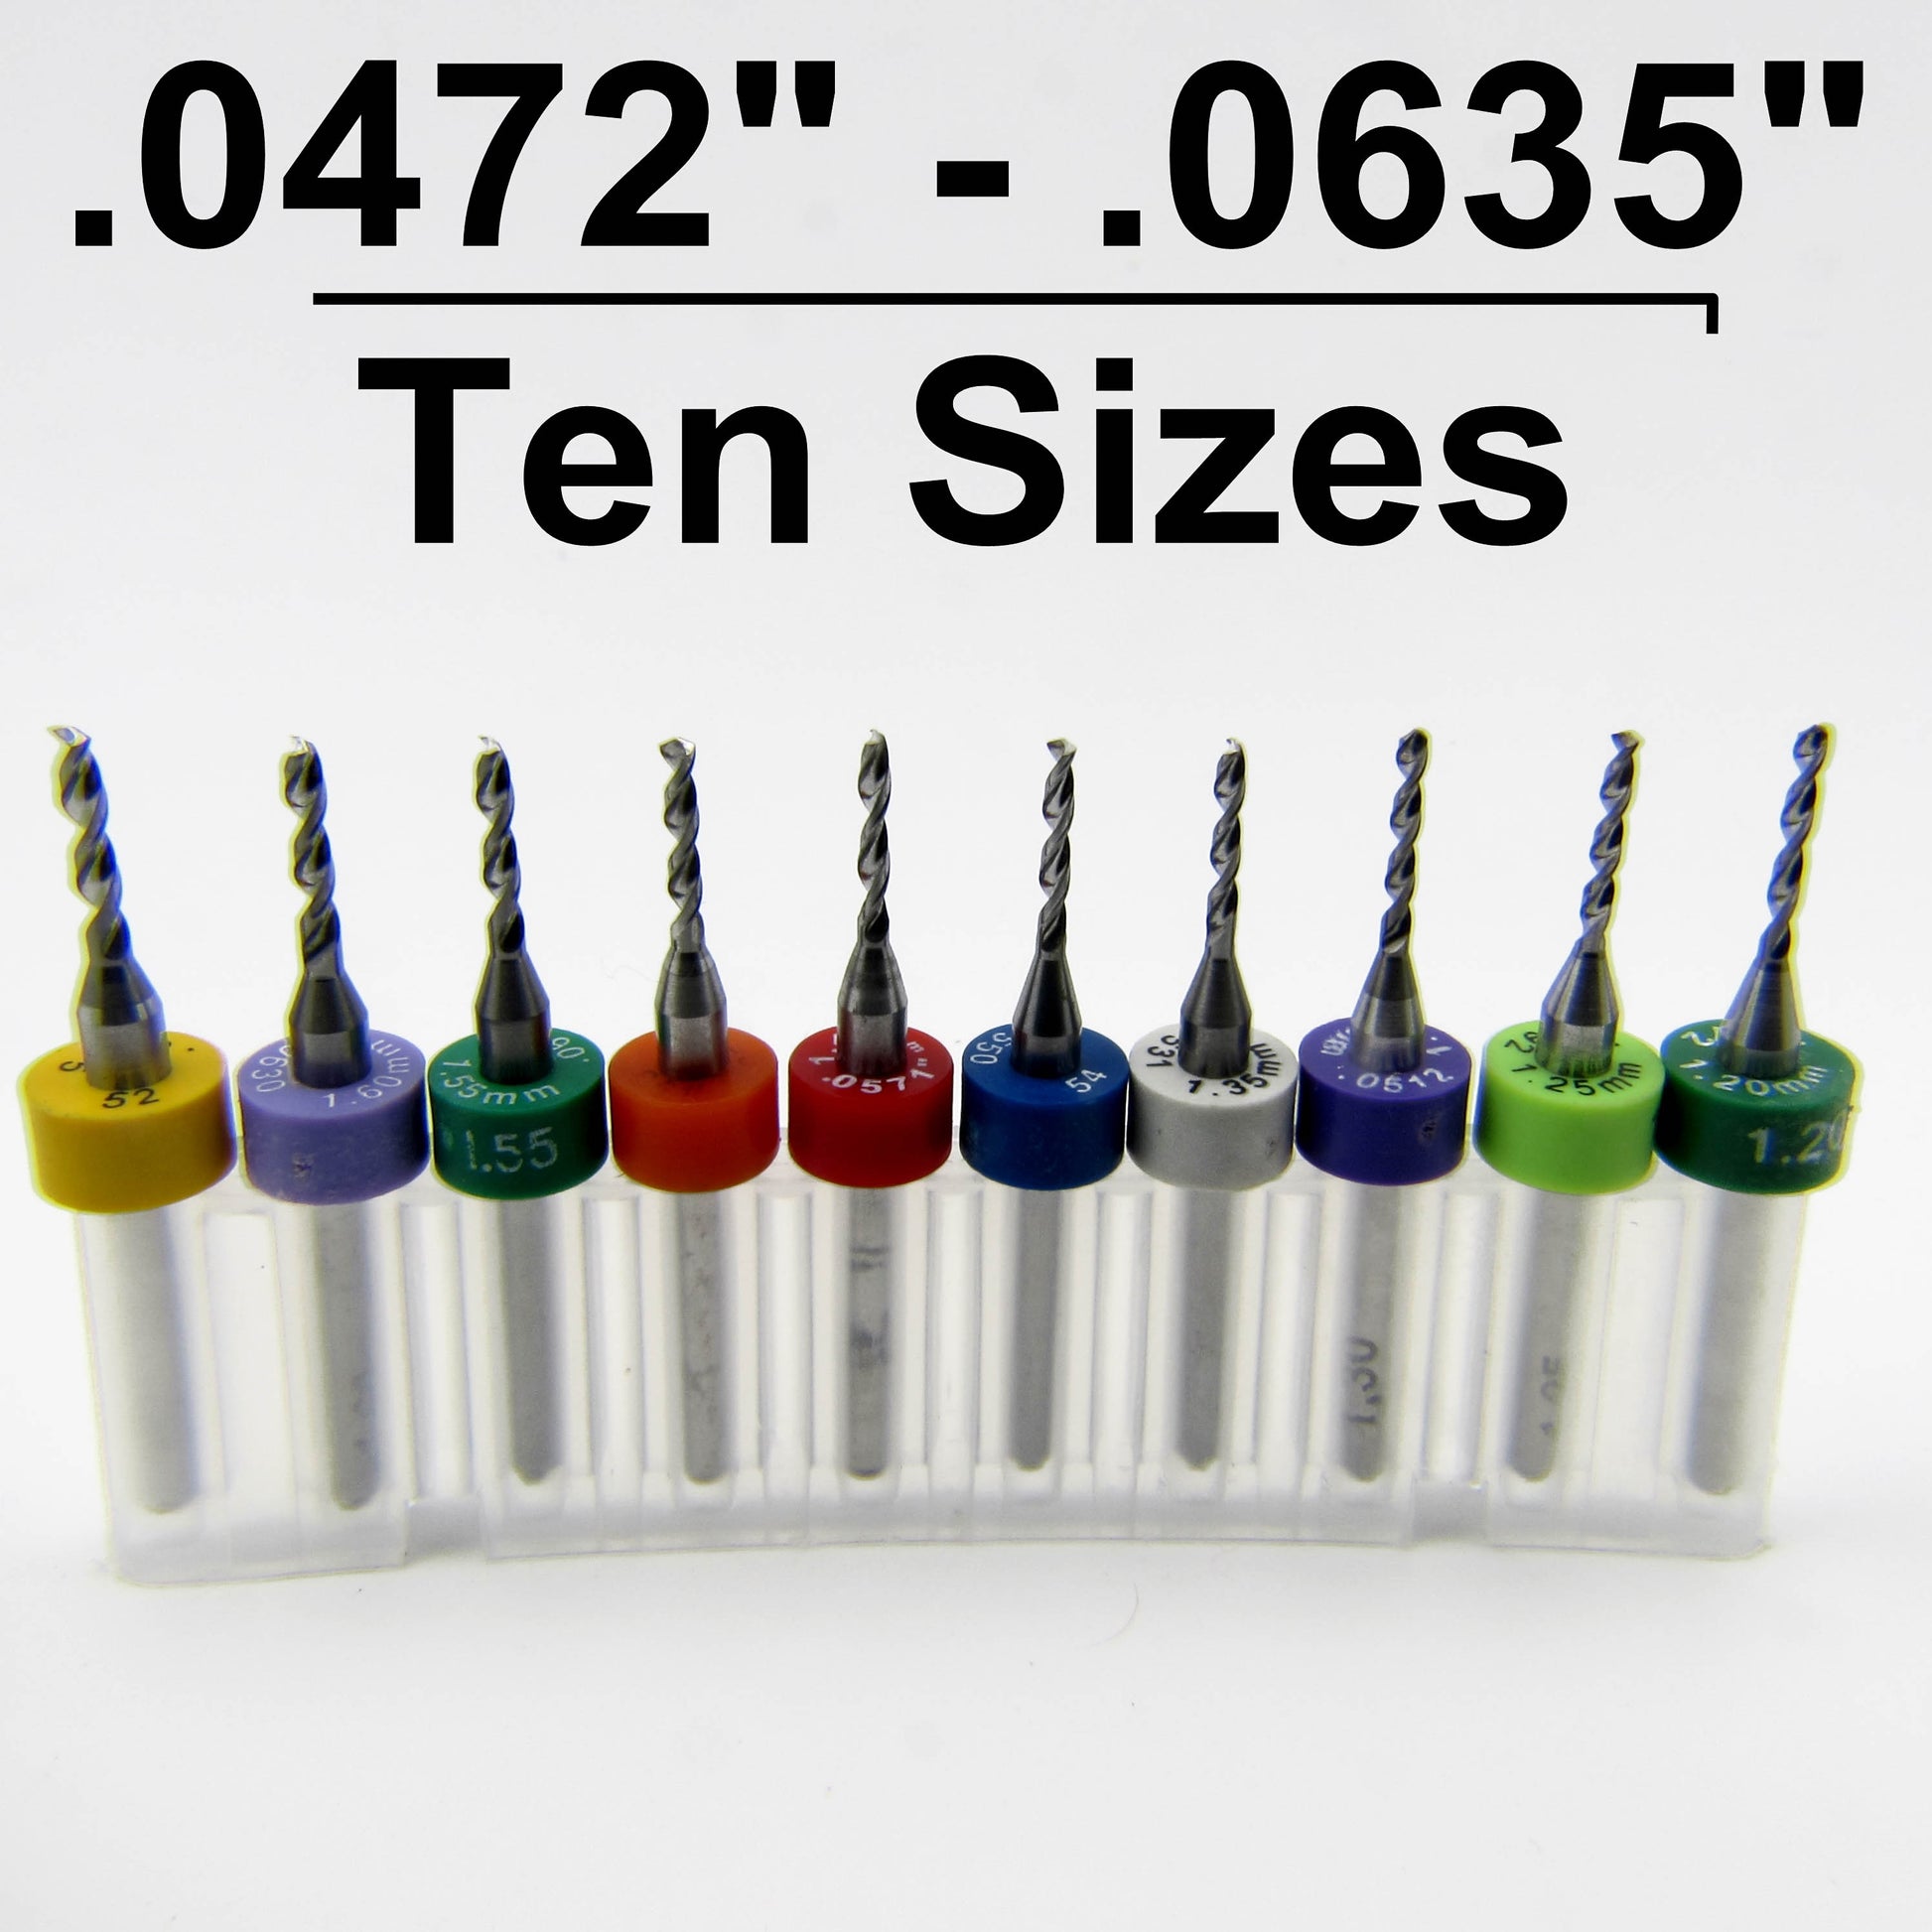 Ten-Piece Incremental Size Solid Carbide Drill Set - Sizes Range from .0472 inches to .0635 inches Includes 1.20mm .047", 1.25mm .049", 1.30mm .051", 1.35mm .053, 1.40mm .055, 1.45mm .057, 1.50mm .059", 1.55mm .061", 1.60mm  .0625" (1/16"), #52 .0635"